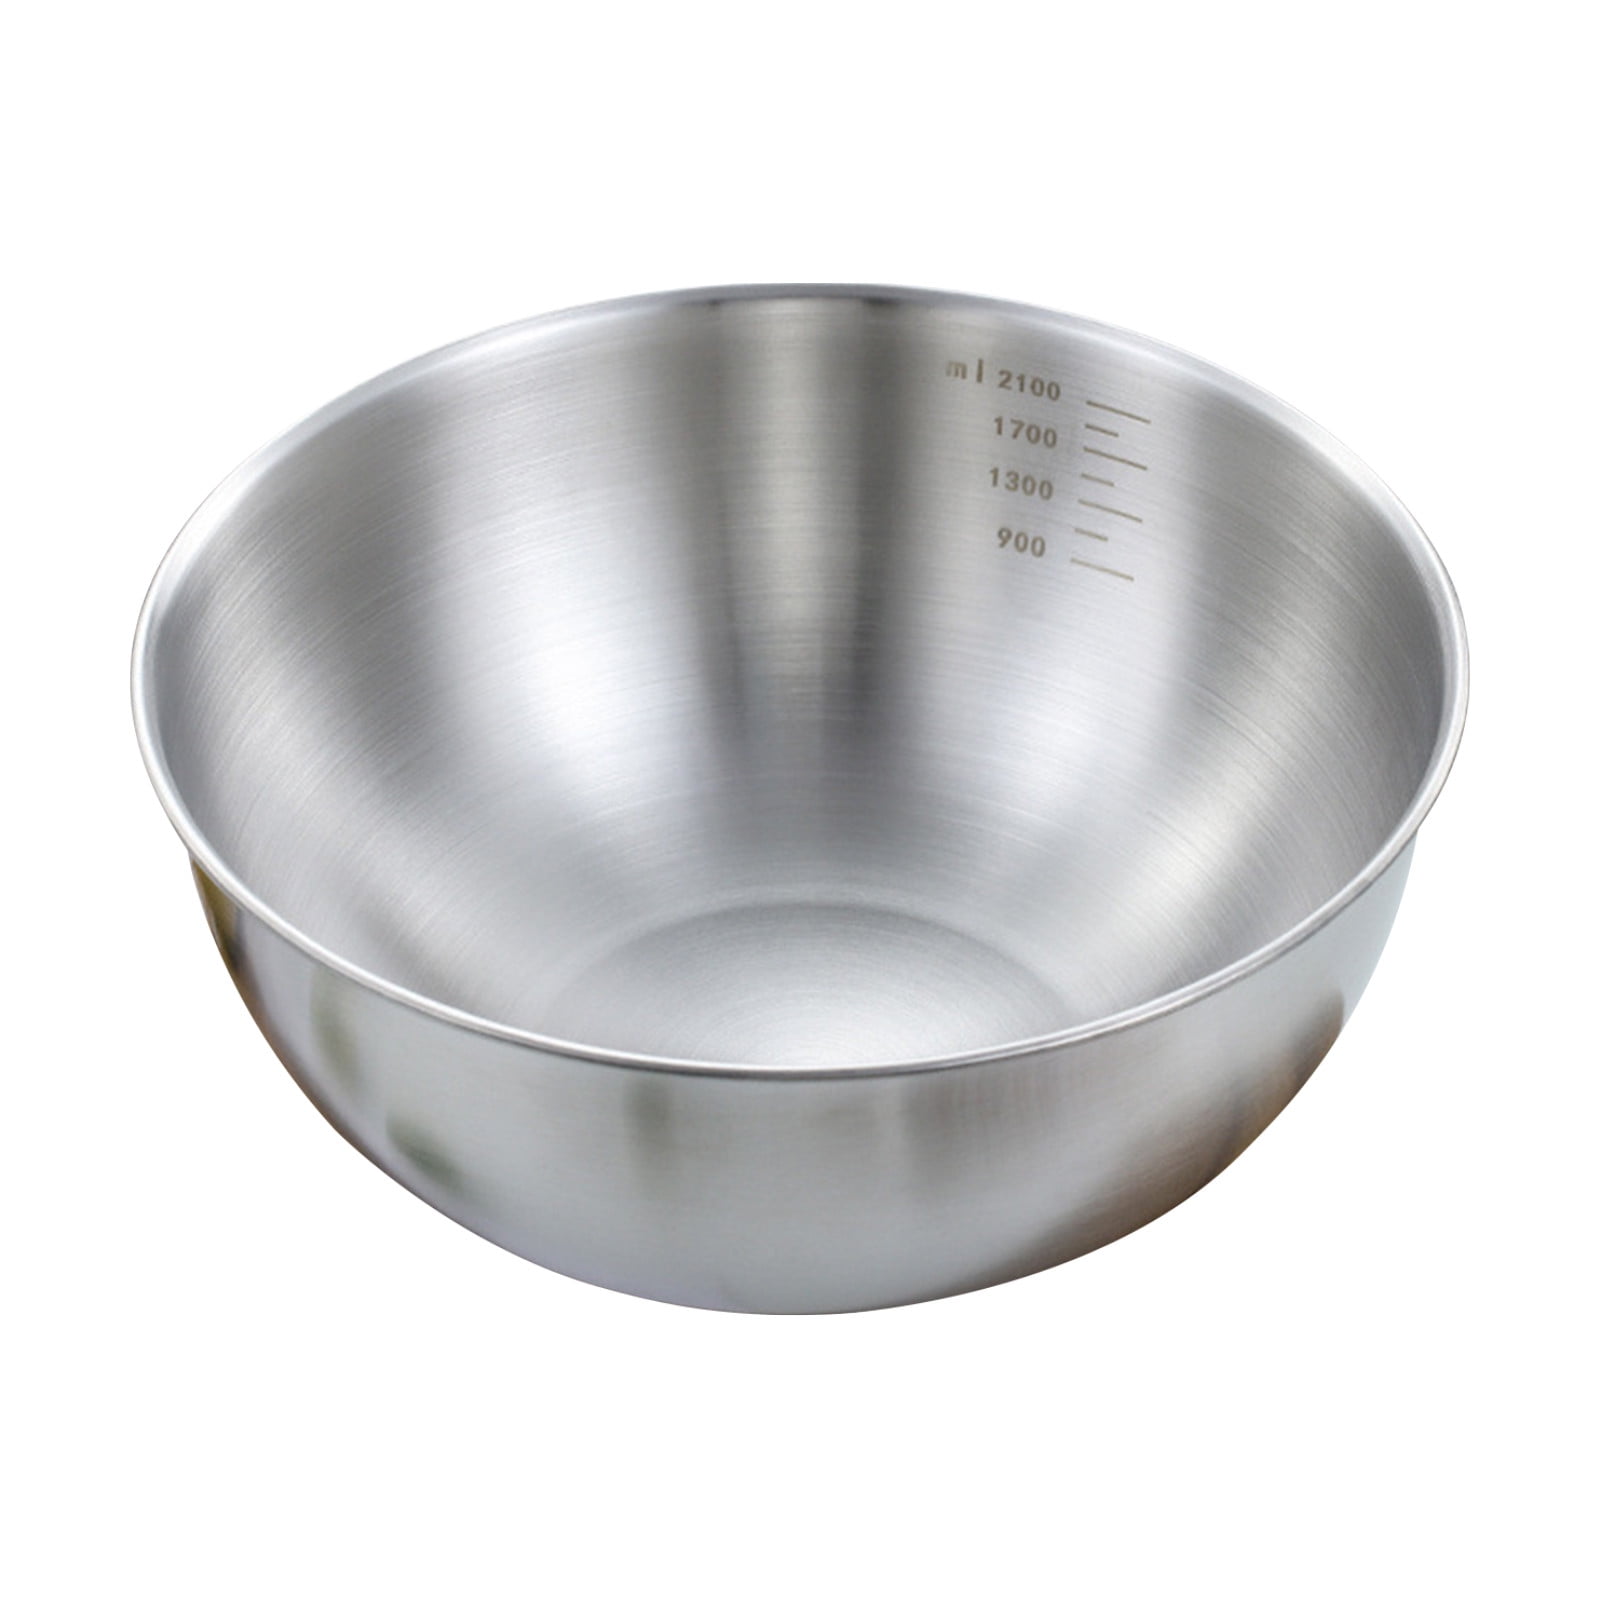 Large Capacity Mixing Bowl With Handle Vegetable Bowl Practical Salad Bowl  Kitchen – the best products in the Joom Geek online store